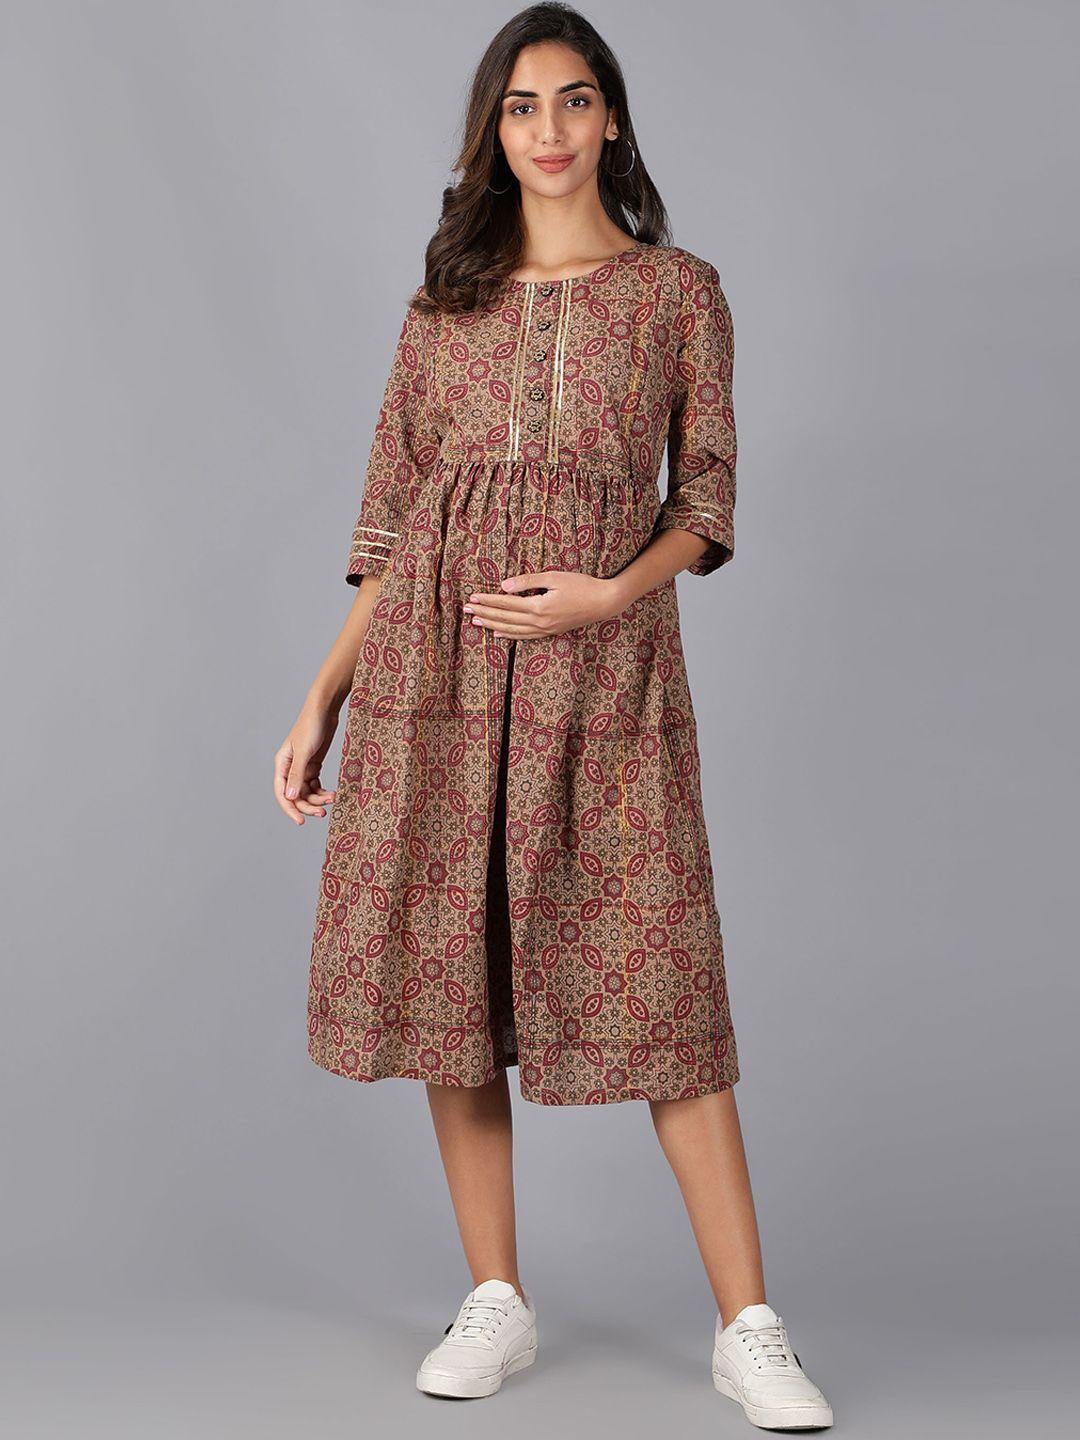 cot'n soft brown ethnic motifs ethnic printed maternity a-line cotton ???????dress